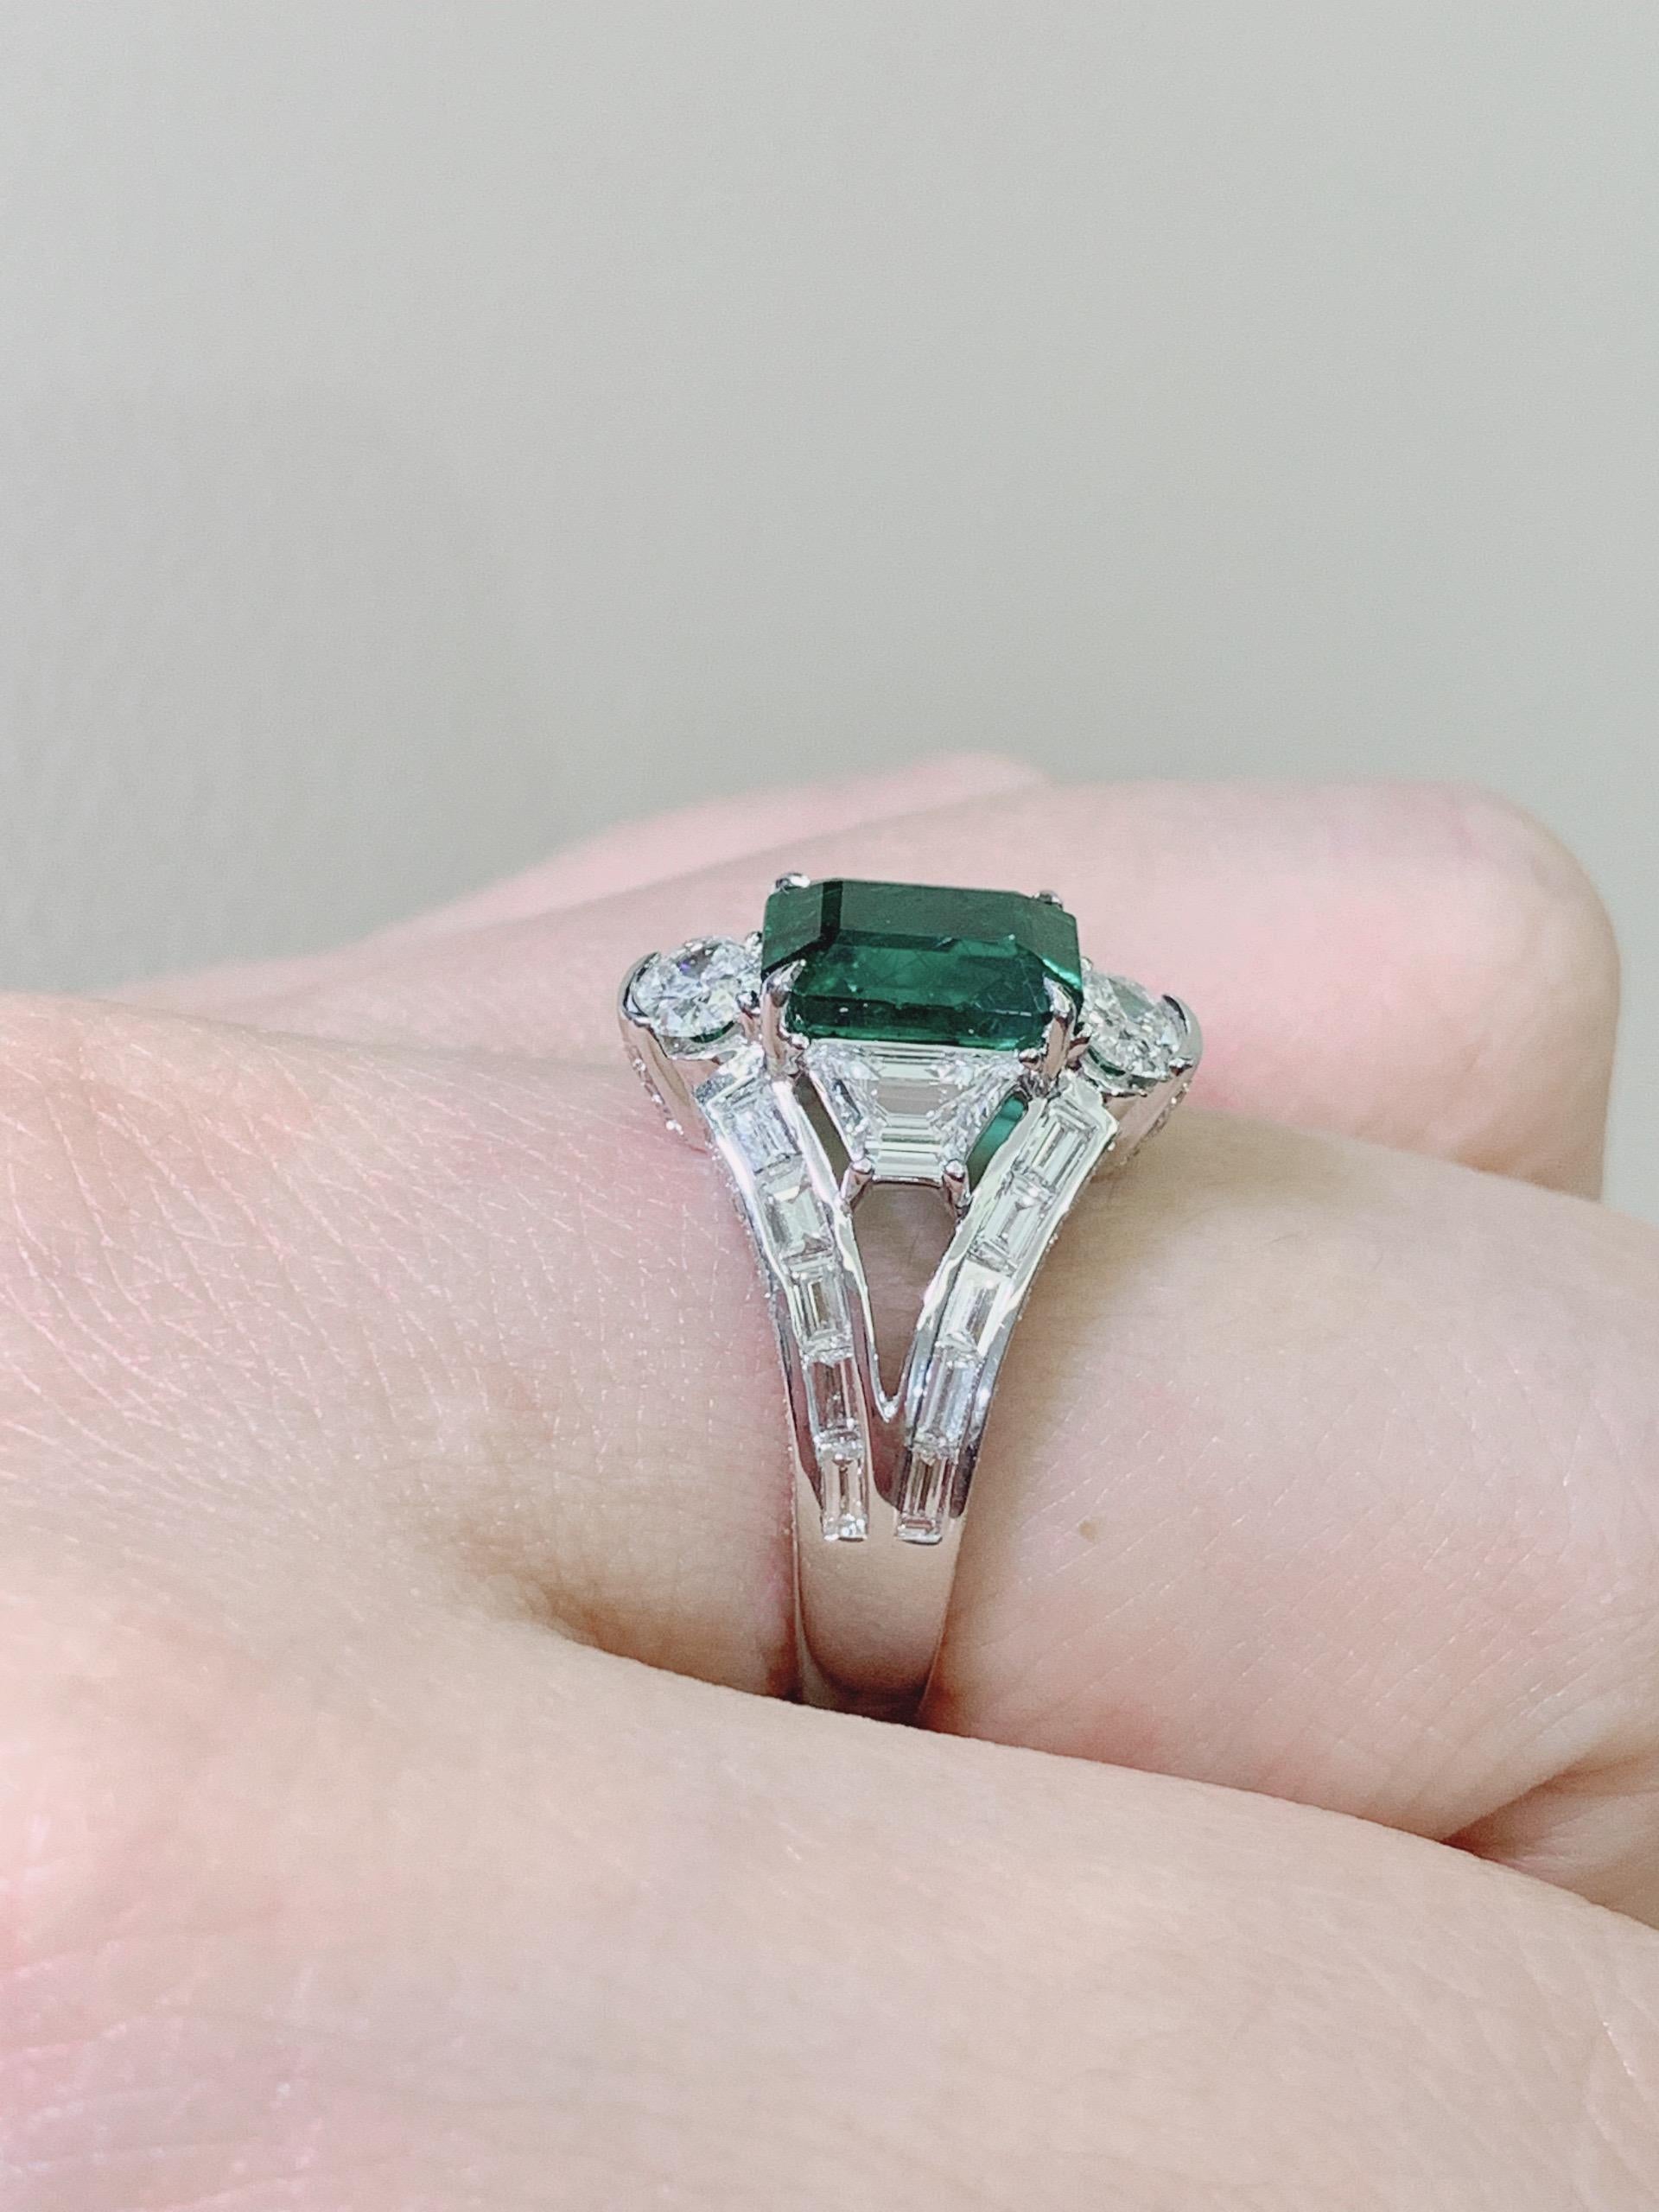 GIA Certified White Gold 2.44 Ct Zambian Natural Emerald Diamond Engagement Ring For Sale 4